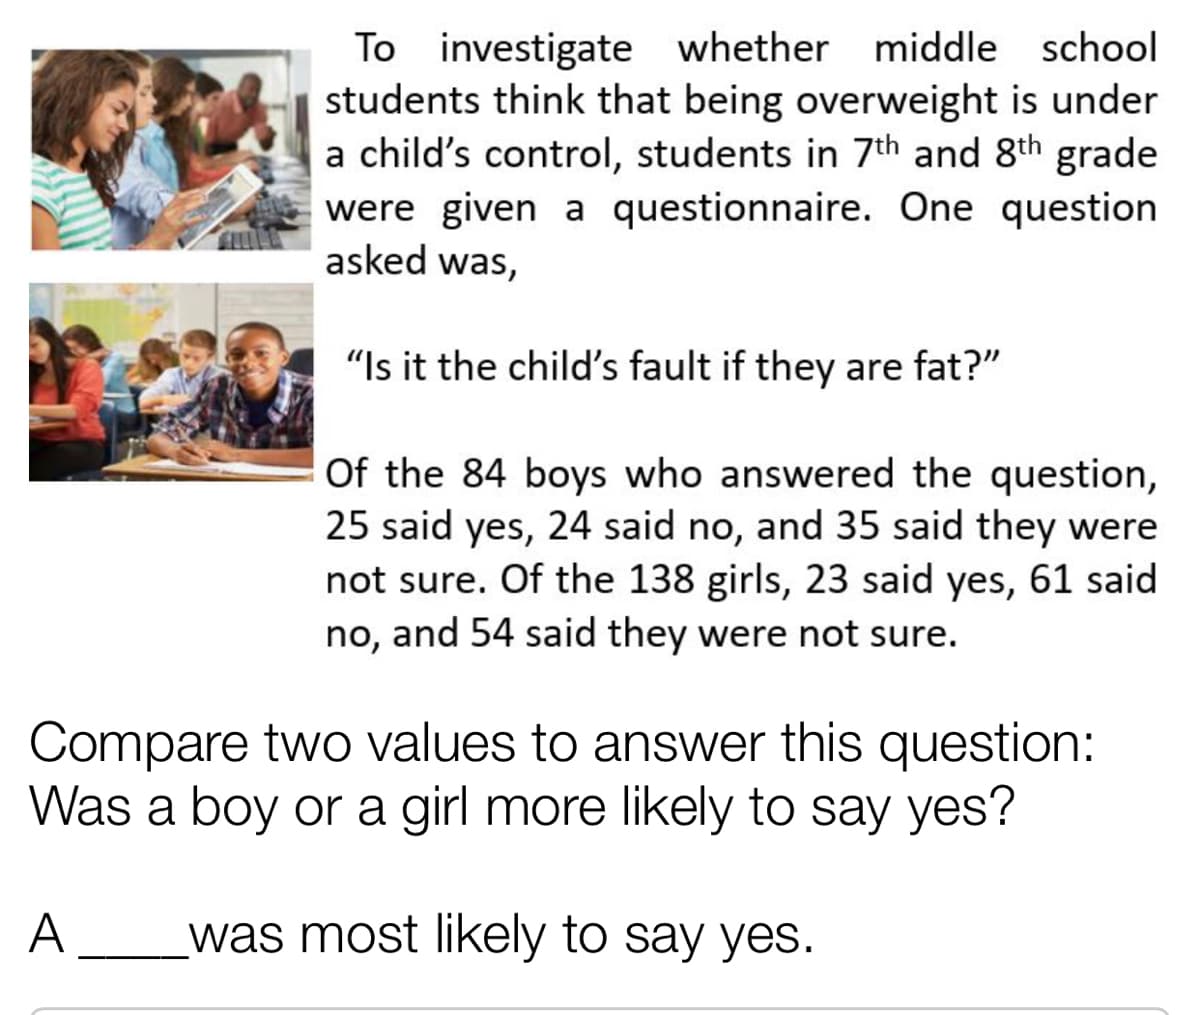 To investigate whether middle school
students think that being overweight is under
a child's control, students in 7th and 8th grade
were given a questionnaire. One question
asked was,
"Is it the child's fault if they are fat?"
Of the 84 boys who answered the question,
25 said yes, 24 said no, and 35 said they were
not sure. Of the 138 girls, 23 said yes, 61 said
no, and 54 said they were not sure.
Compare two values to answer this question:
Was a boy or a girl more likely to say yes?
A
was most likely to say yes.
